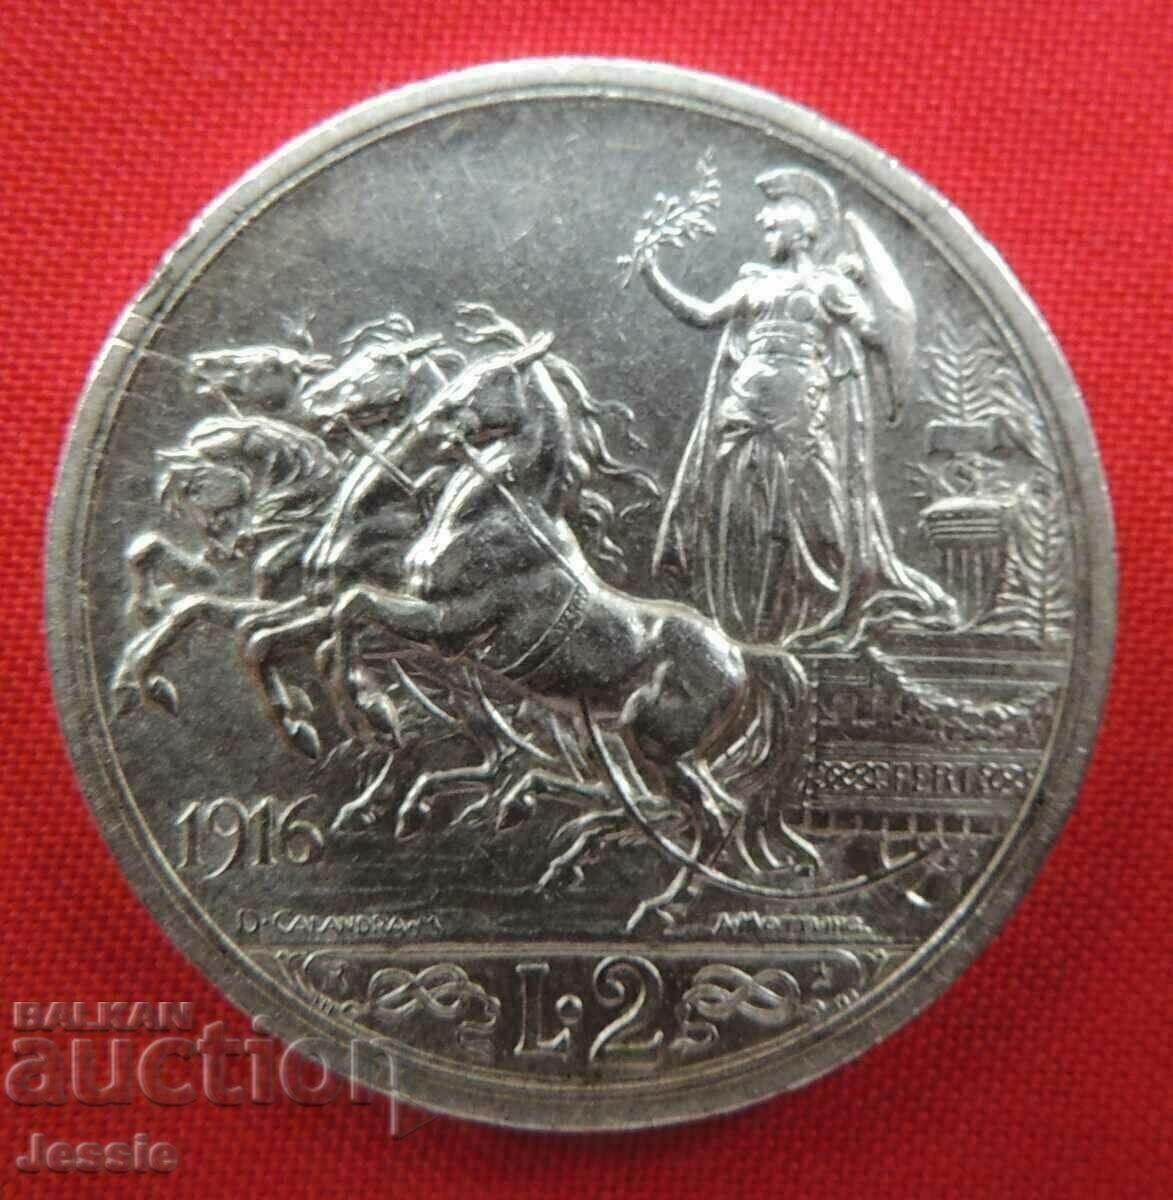 2 lira 1916 R Italy silver Quality Compare and Rate!